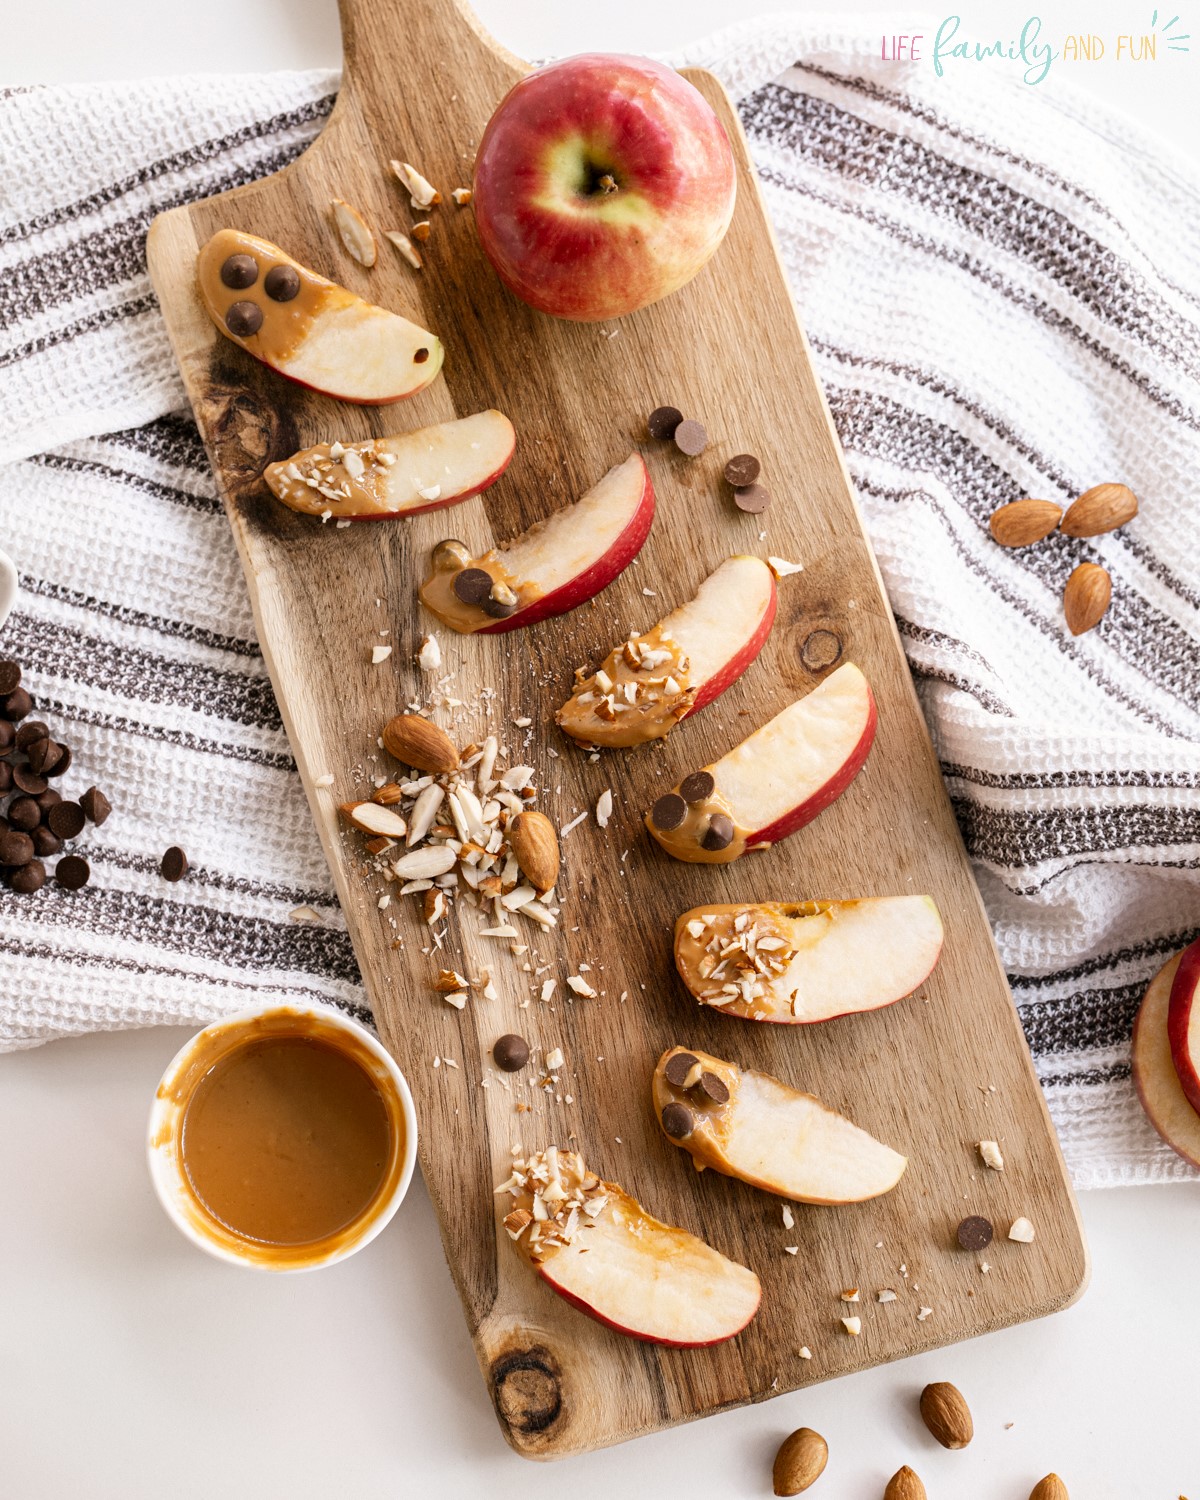 Apple Slices with Peanut Butter - simple recipe for breakfast